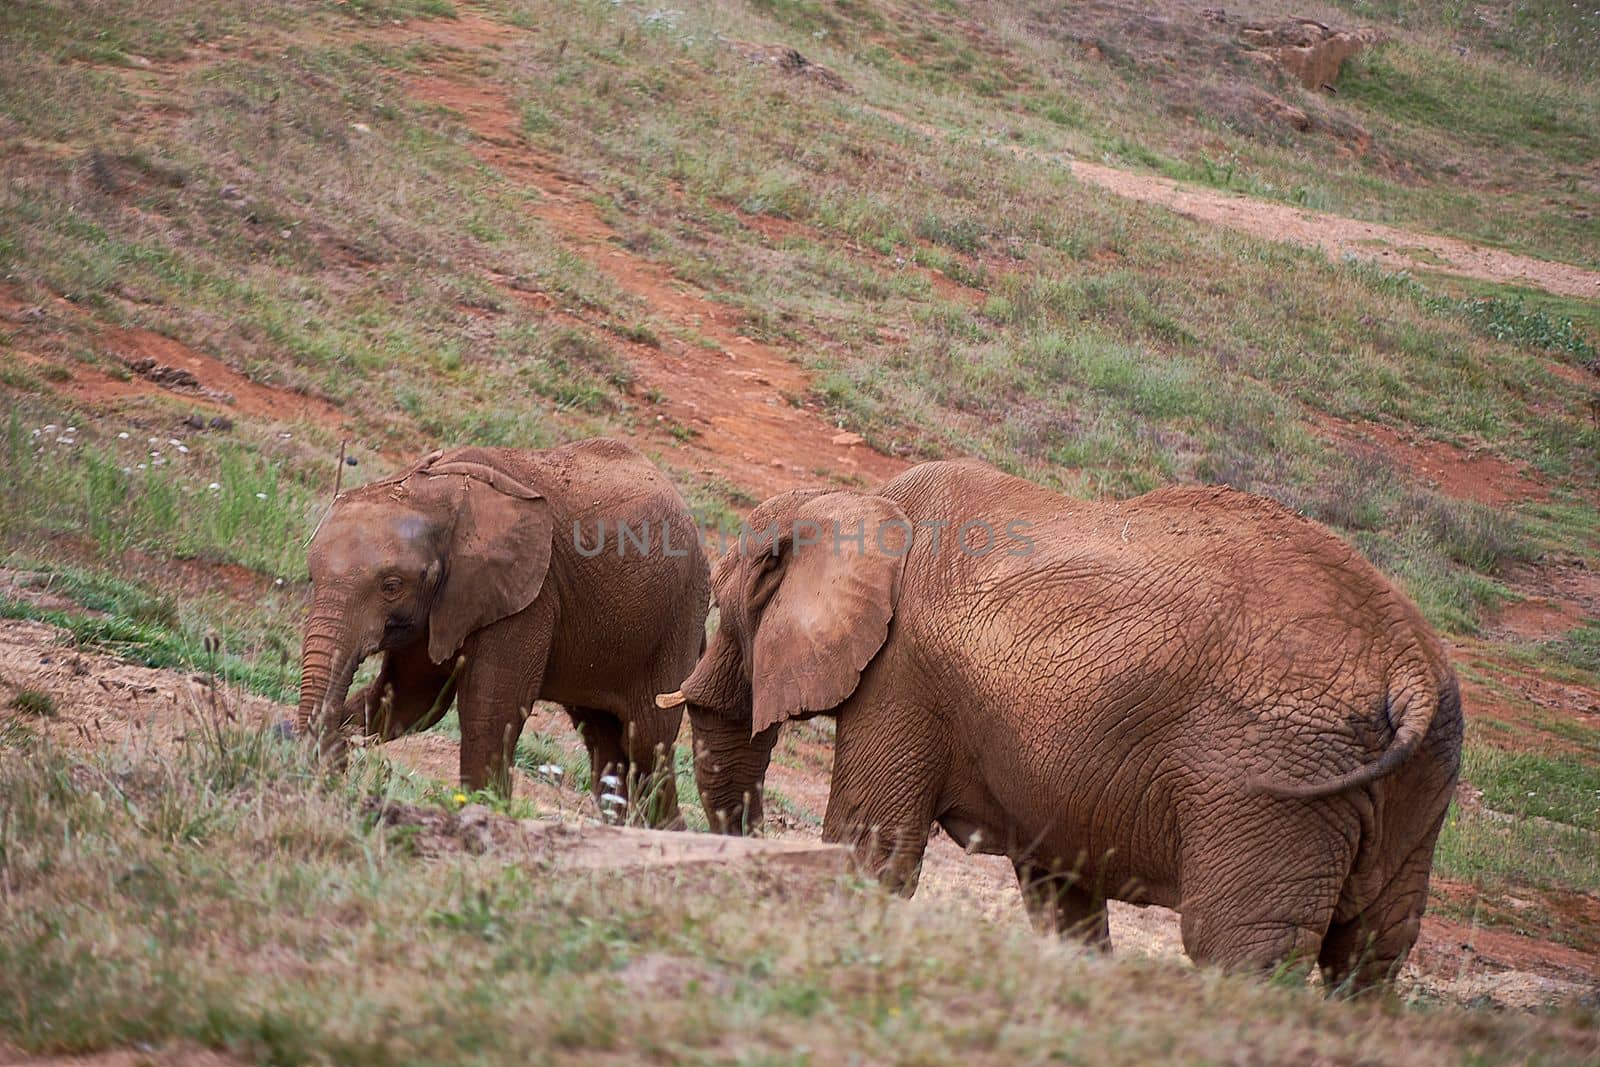 Female elephant with her calf walking in the meadow. mother and son, daughter, green, lonely, no people, love, protection, kinship